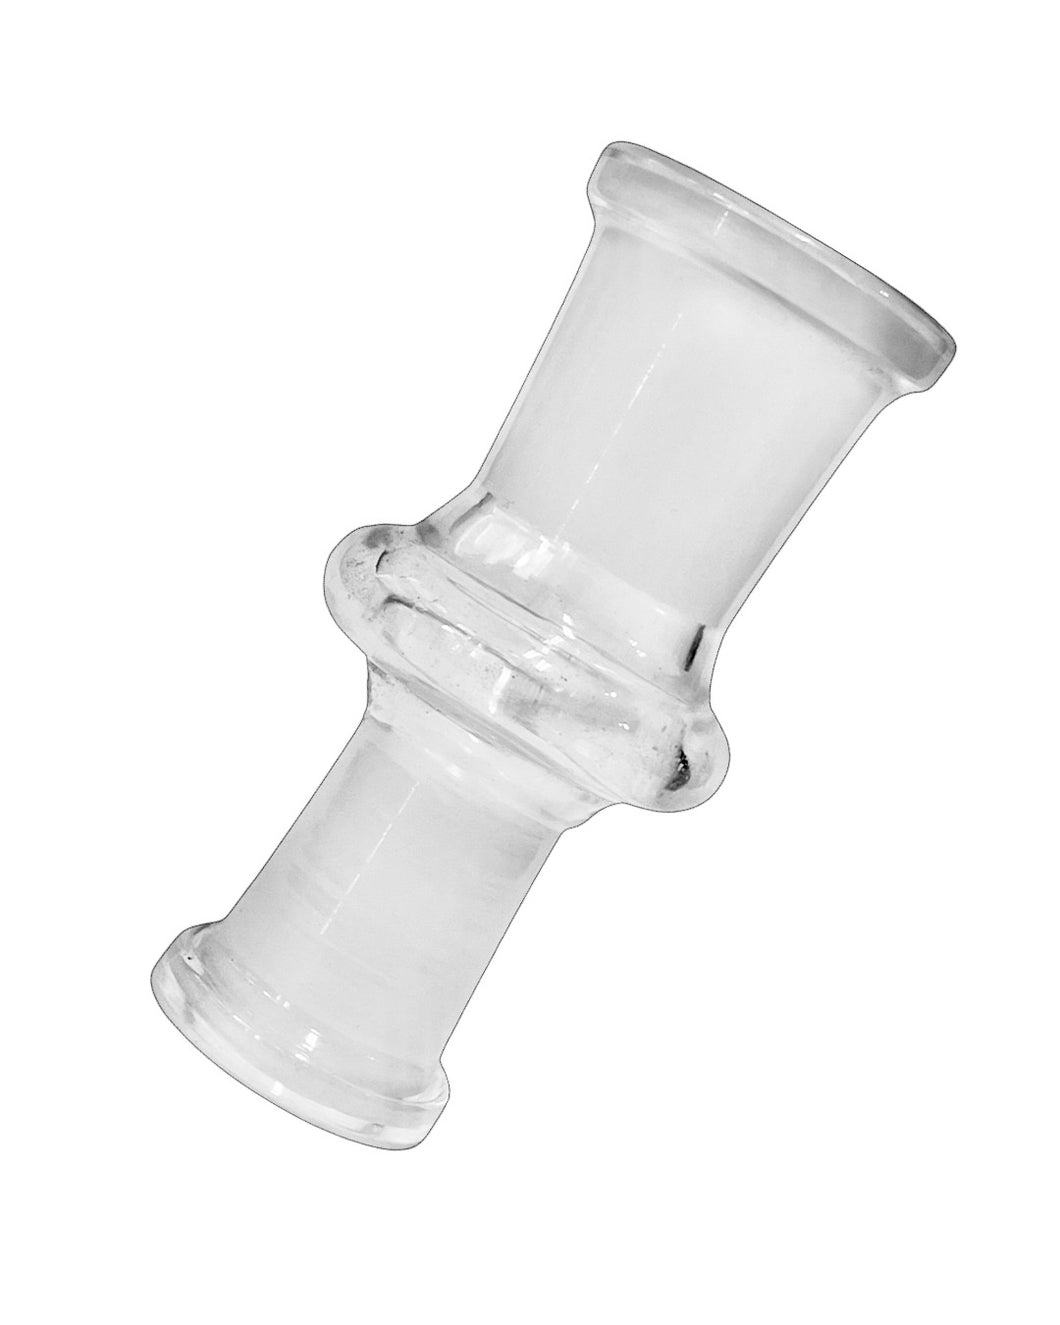 A 14mm Female to 18mm Female Straight Glass Adapter.